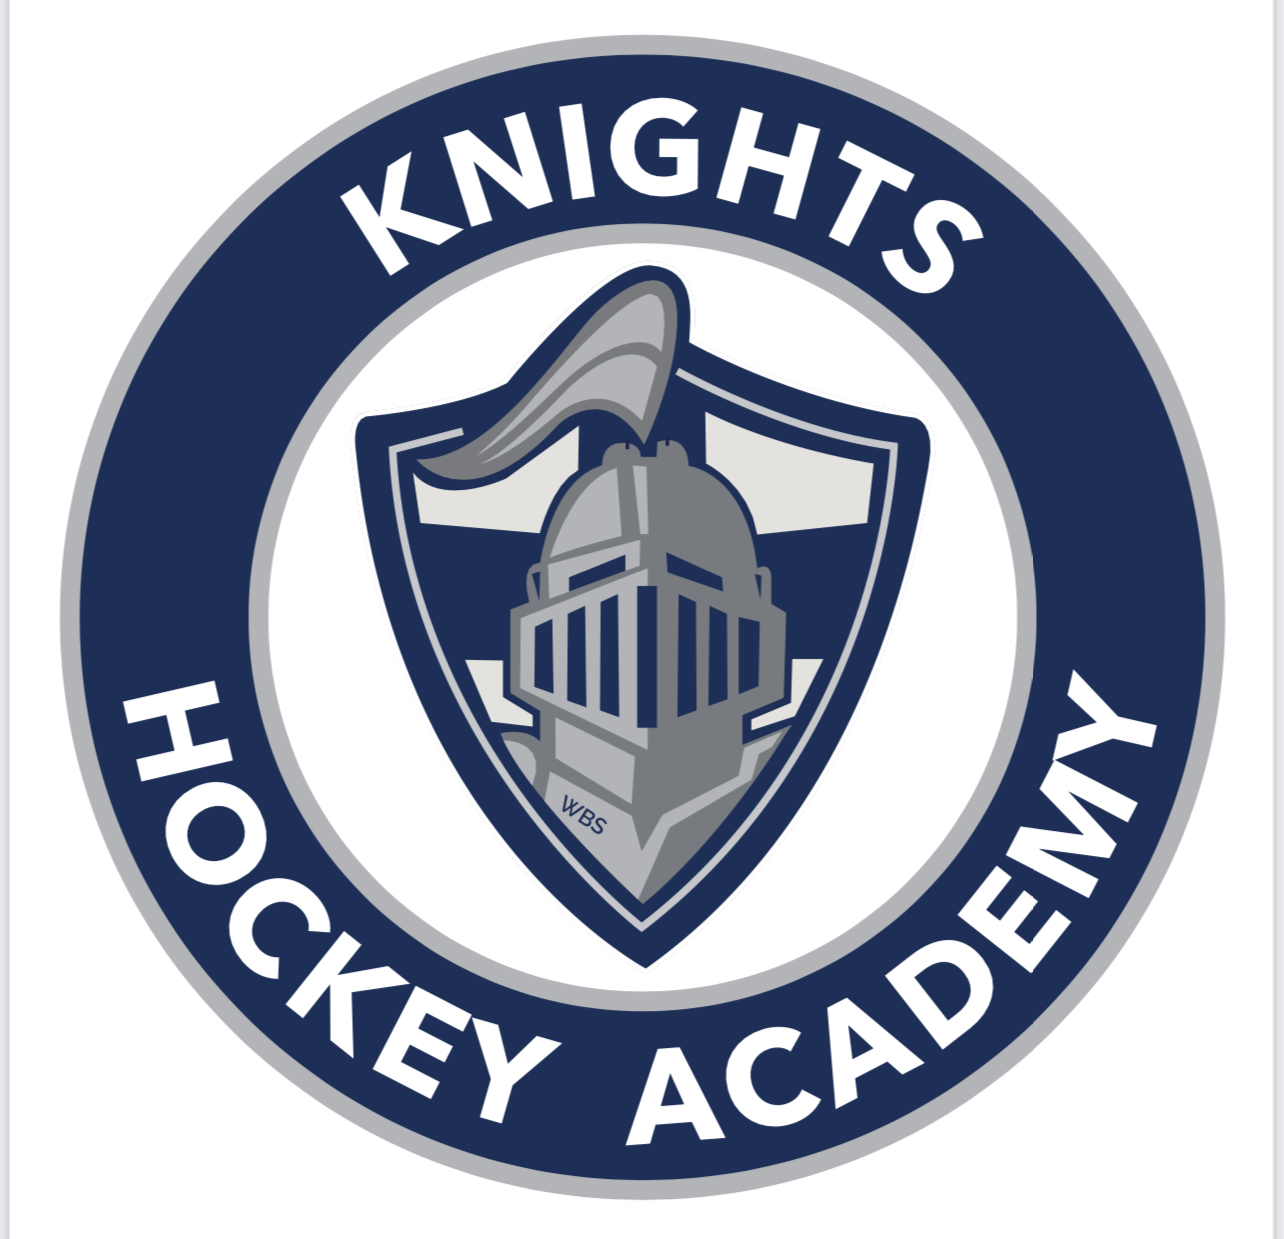 Knights Hockey Academy Sponsor for Holiday Concert to Support Lancaster Early Education Center formerly Lancaster Day Care Center Quality early care & education since 1915.